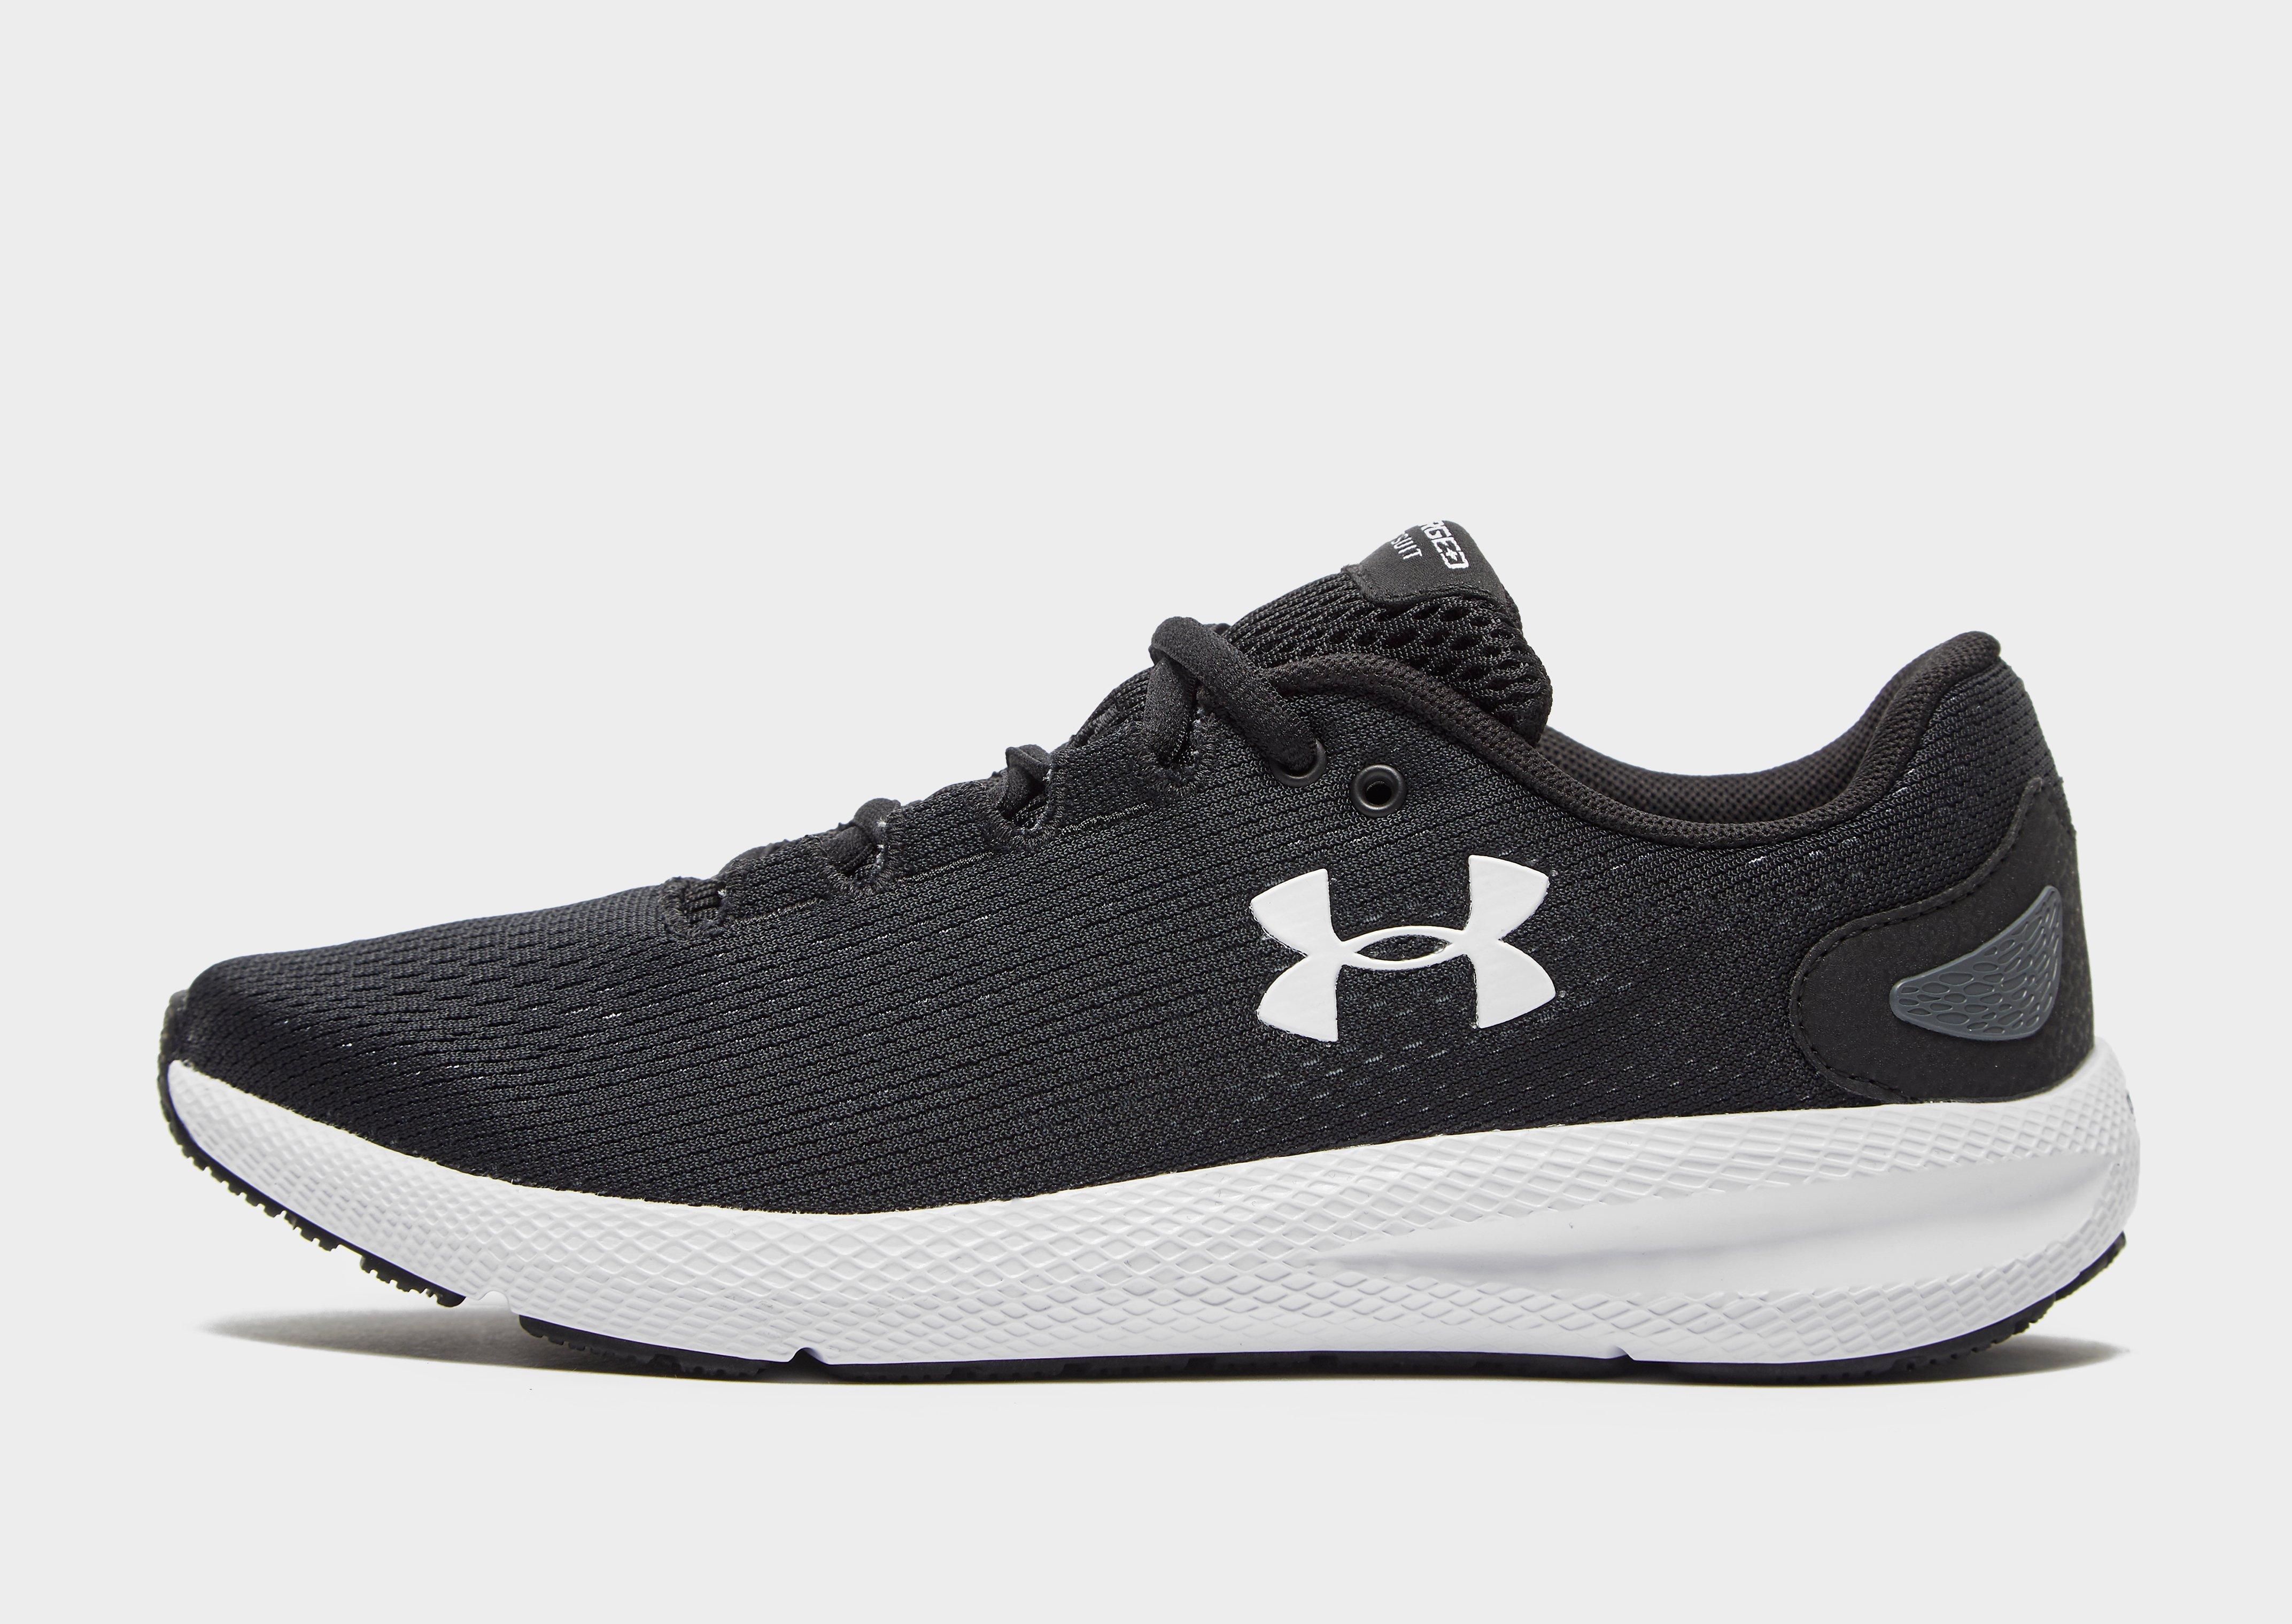 under armour charged trainers